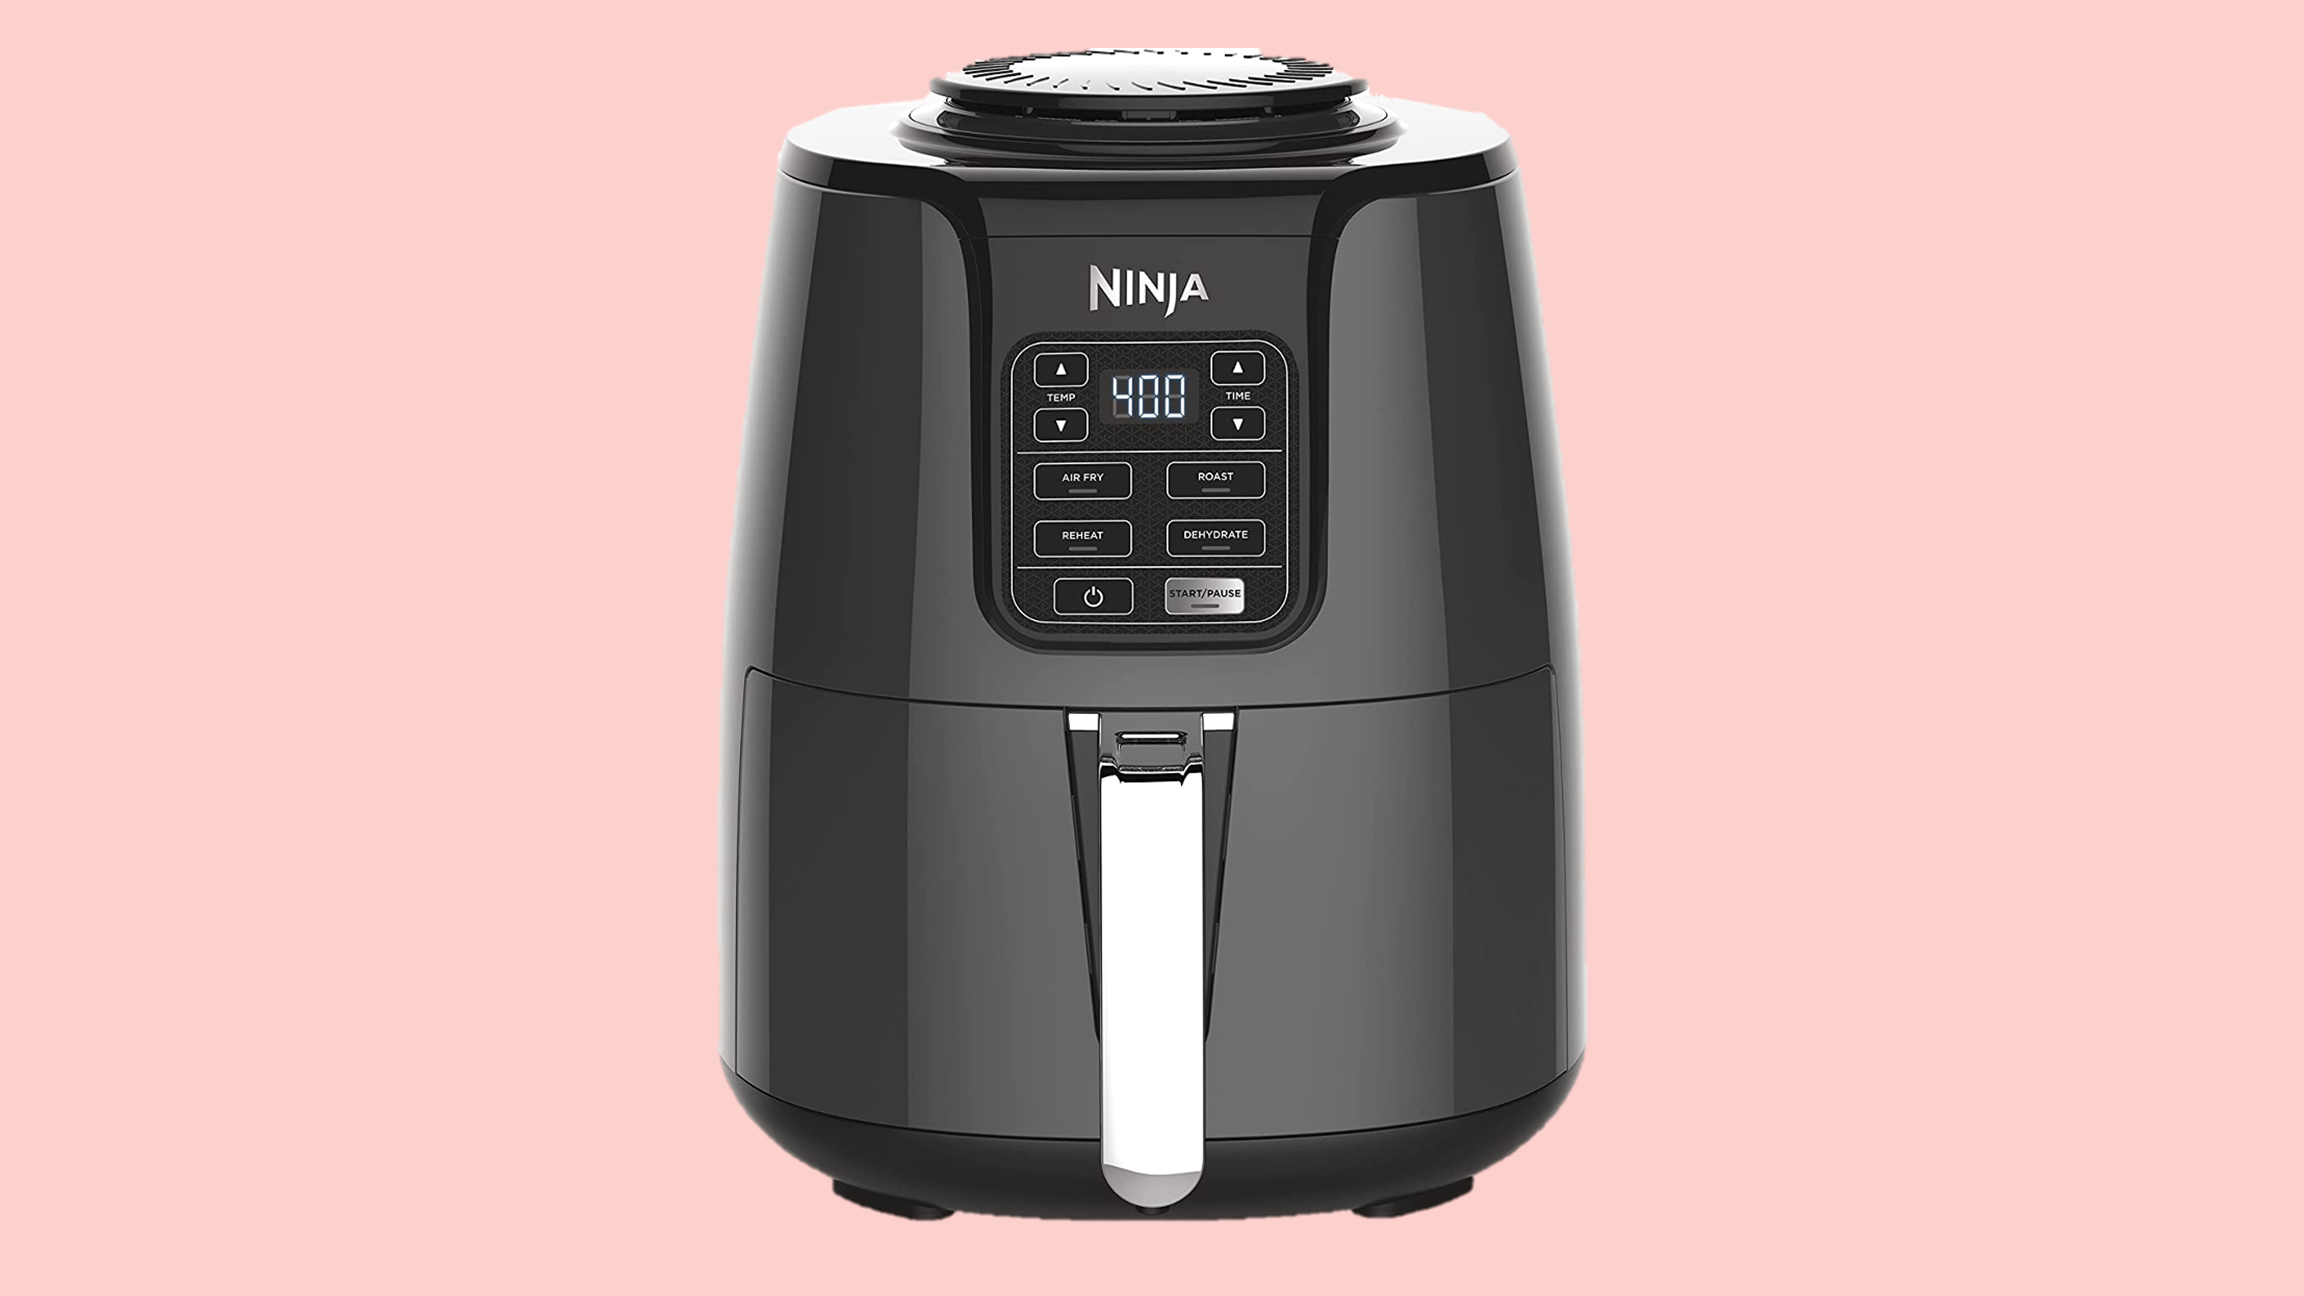 Clean Up Is a Breeze in This Air Fryer—and It's 39% Off